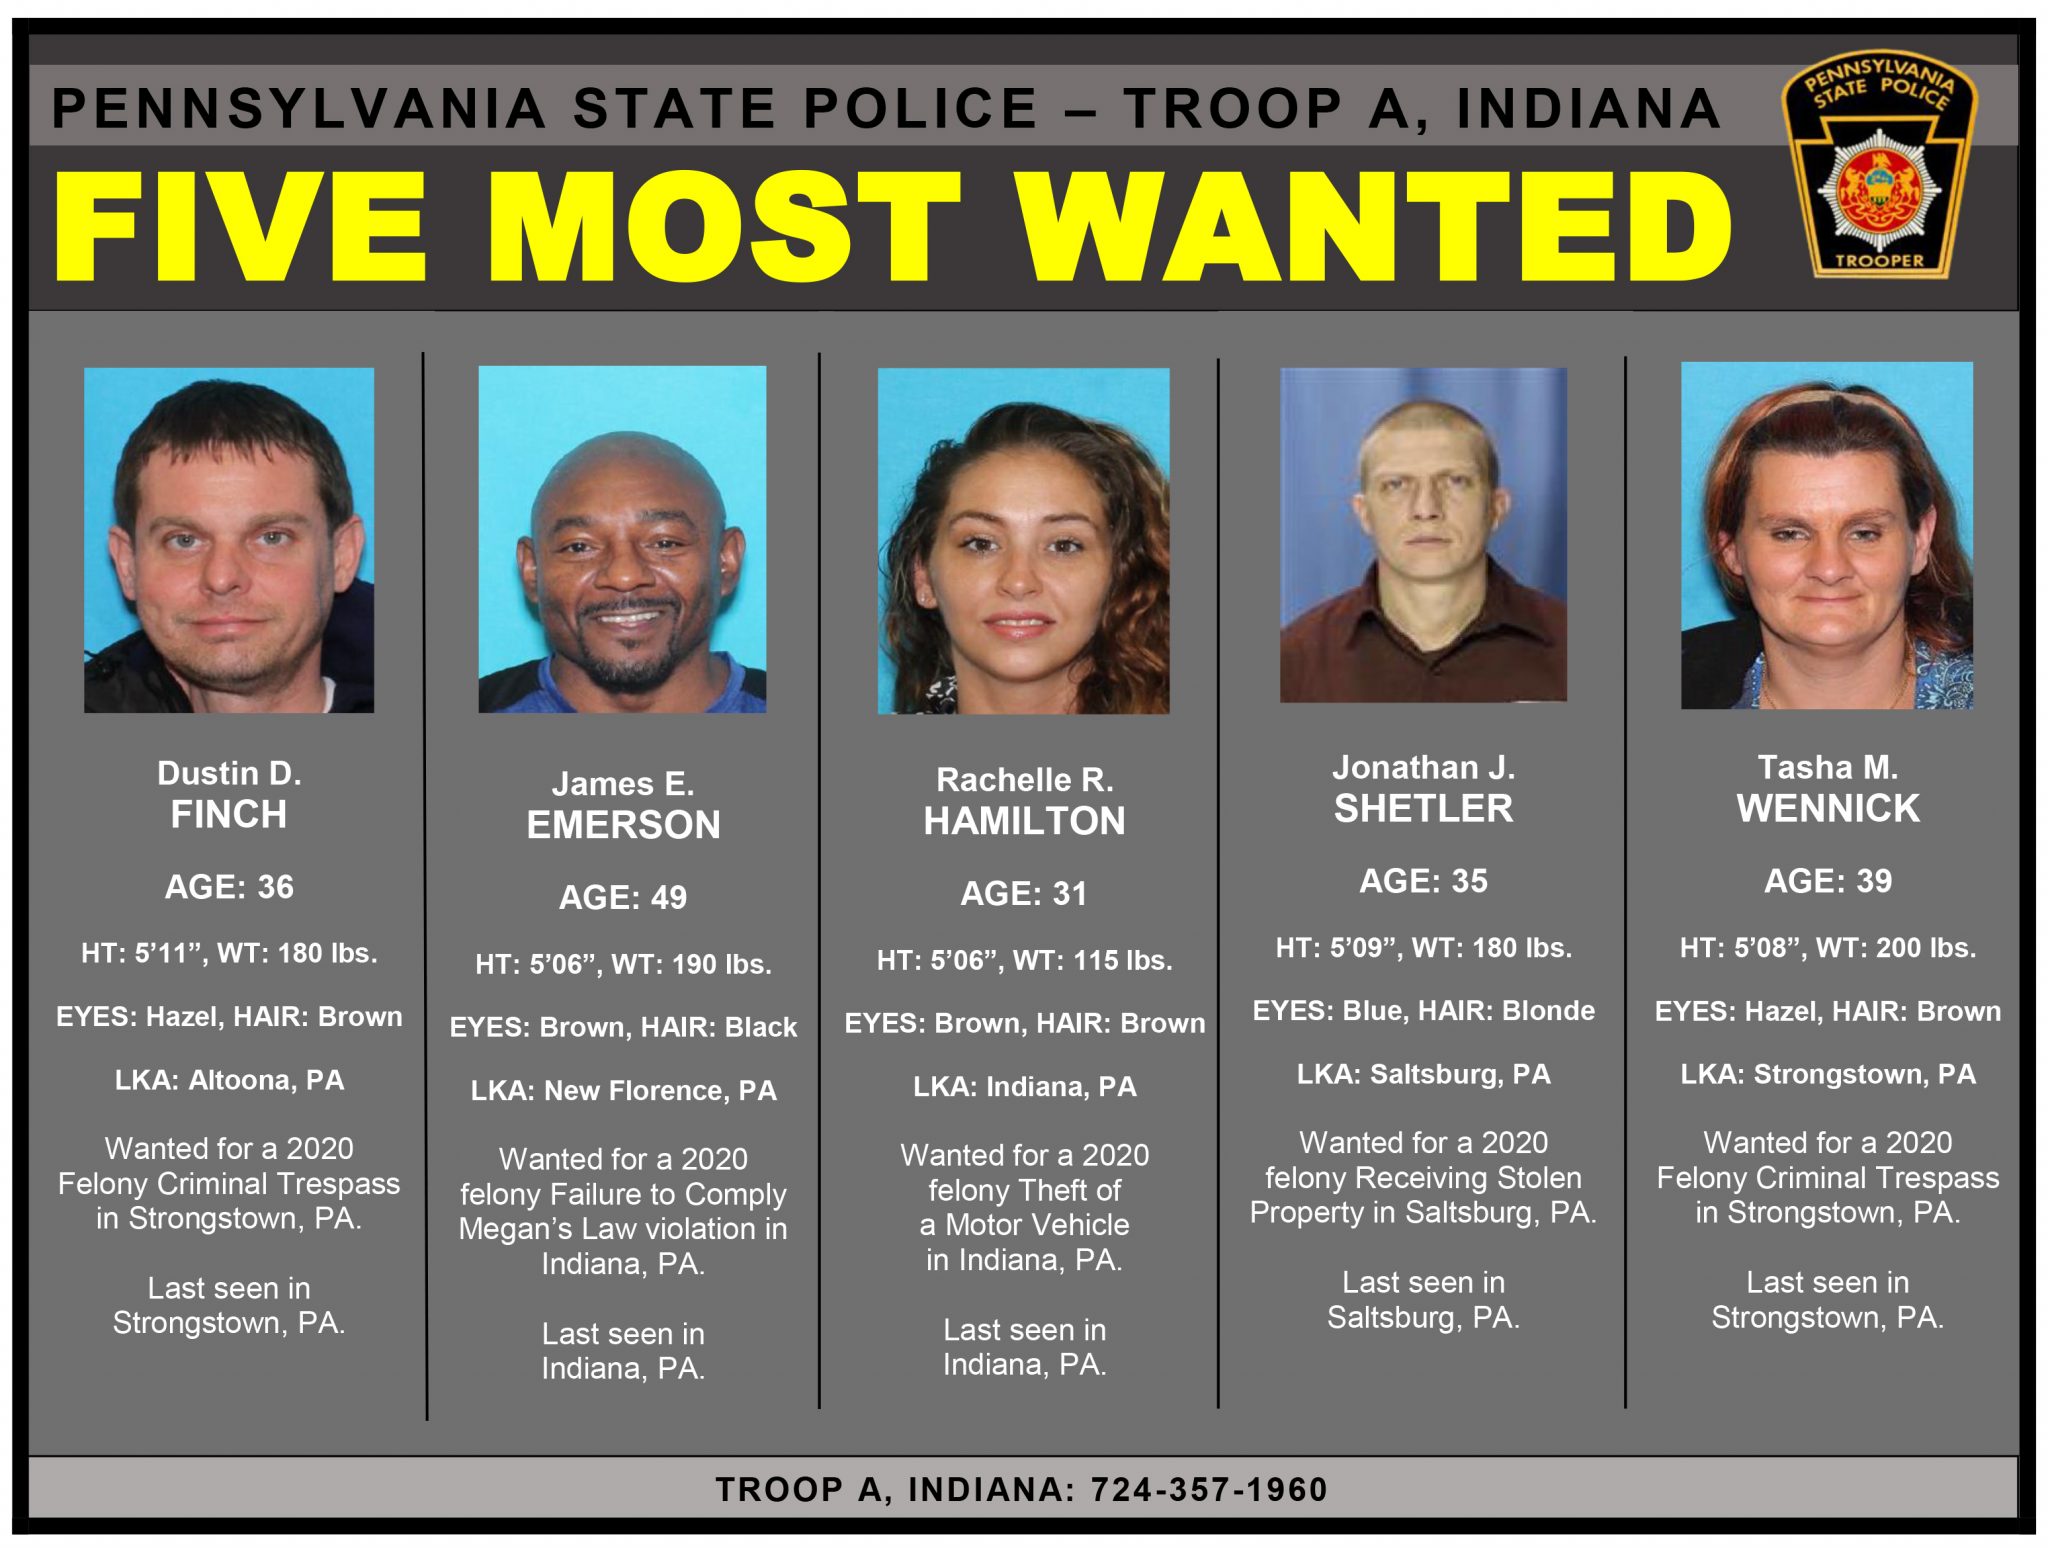 STATE POLICE RELEASE CURRENT FIVE MOST WANTED LIST WDAD AM1450 & 100.3FM